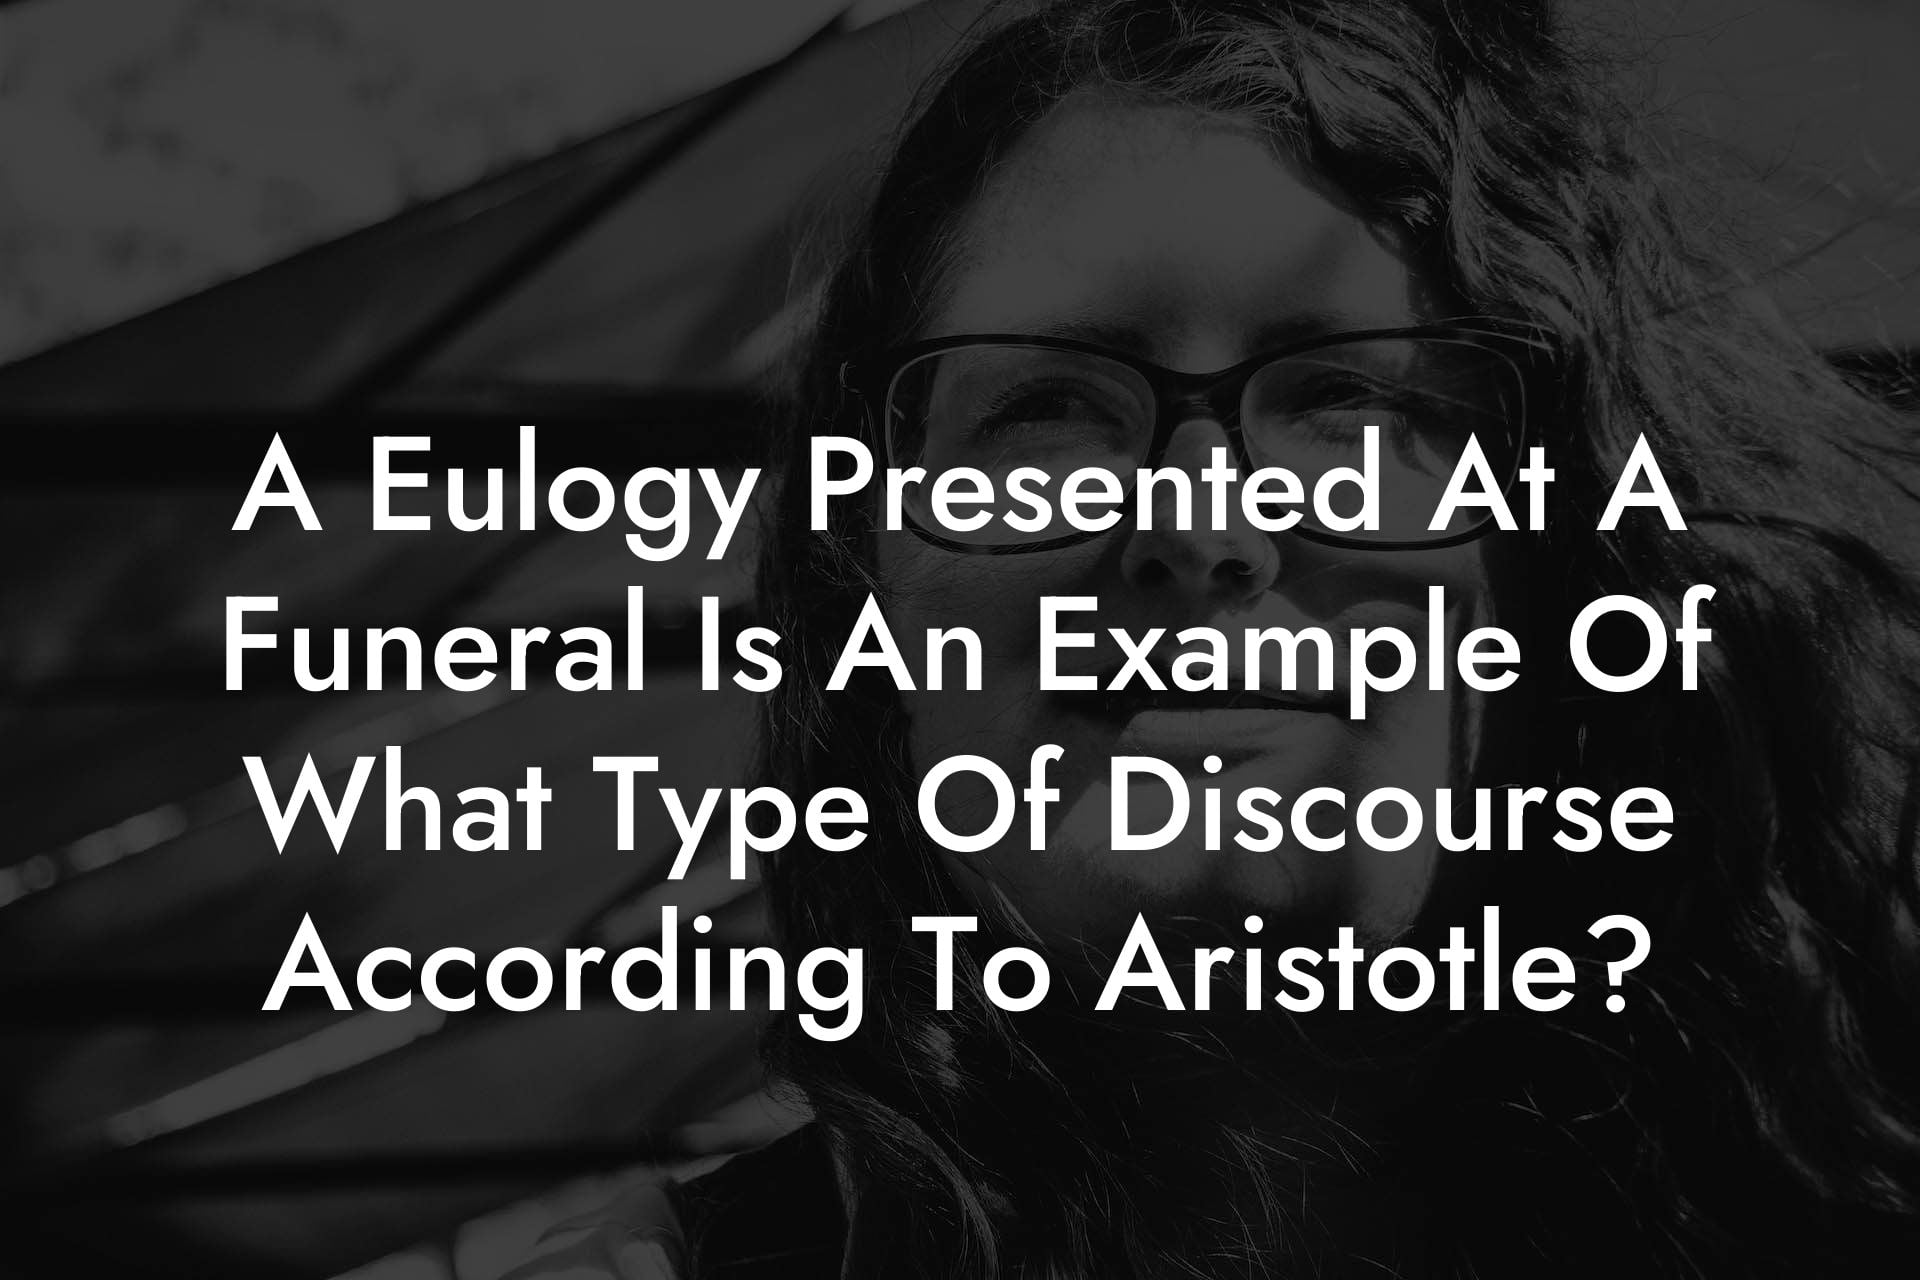 A Eulogy Presented At A Funeral Is An Example Of What Type Of Discourse According To Aristotle?